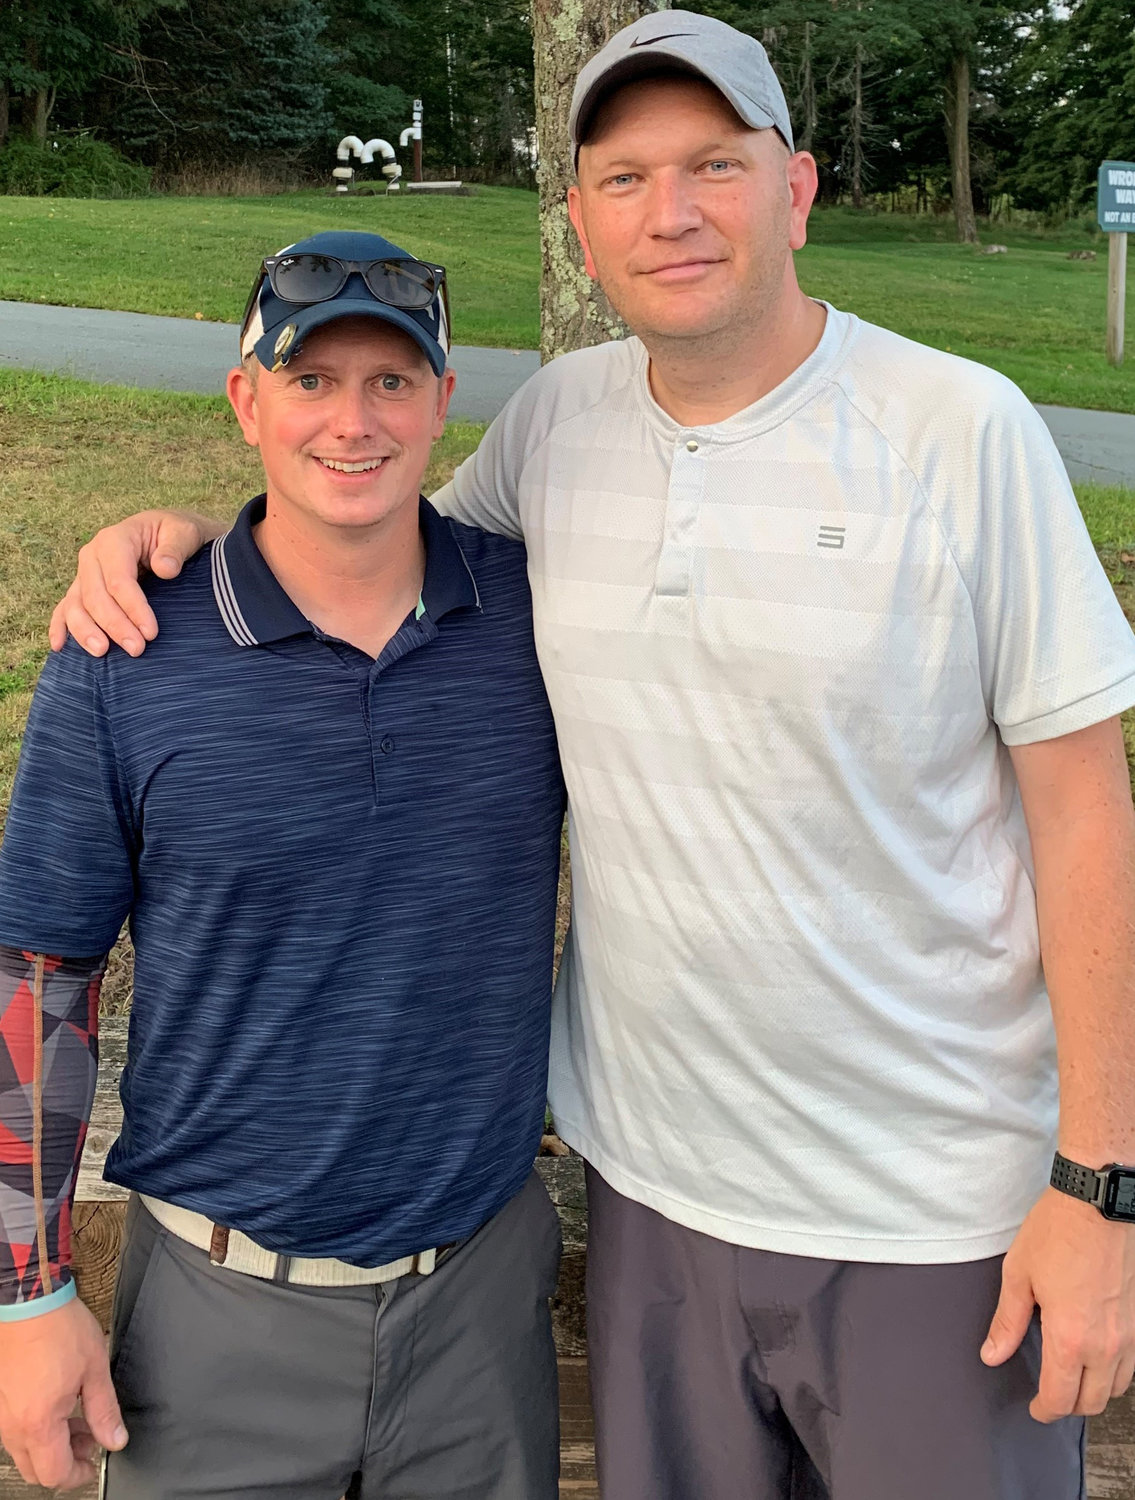 Bryan Thomas, left, and Chuck Husson IV are the regular season champions of the 2021 Sullivan County Golf Travel League.